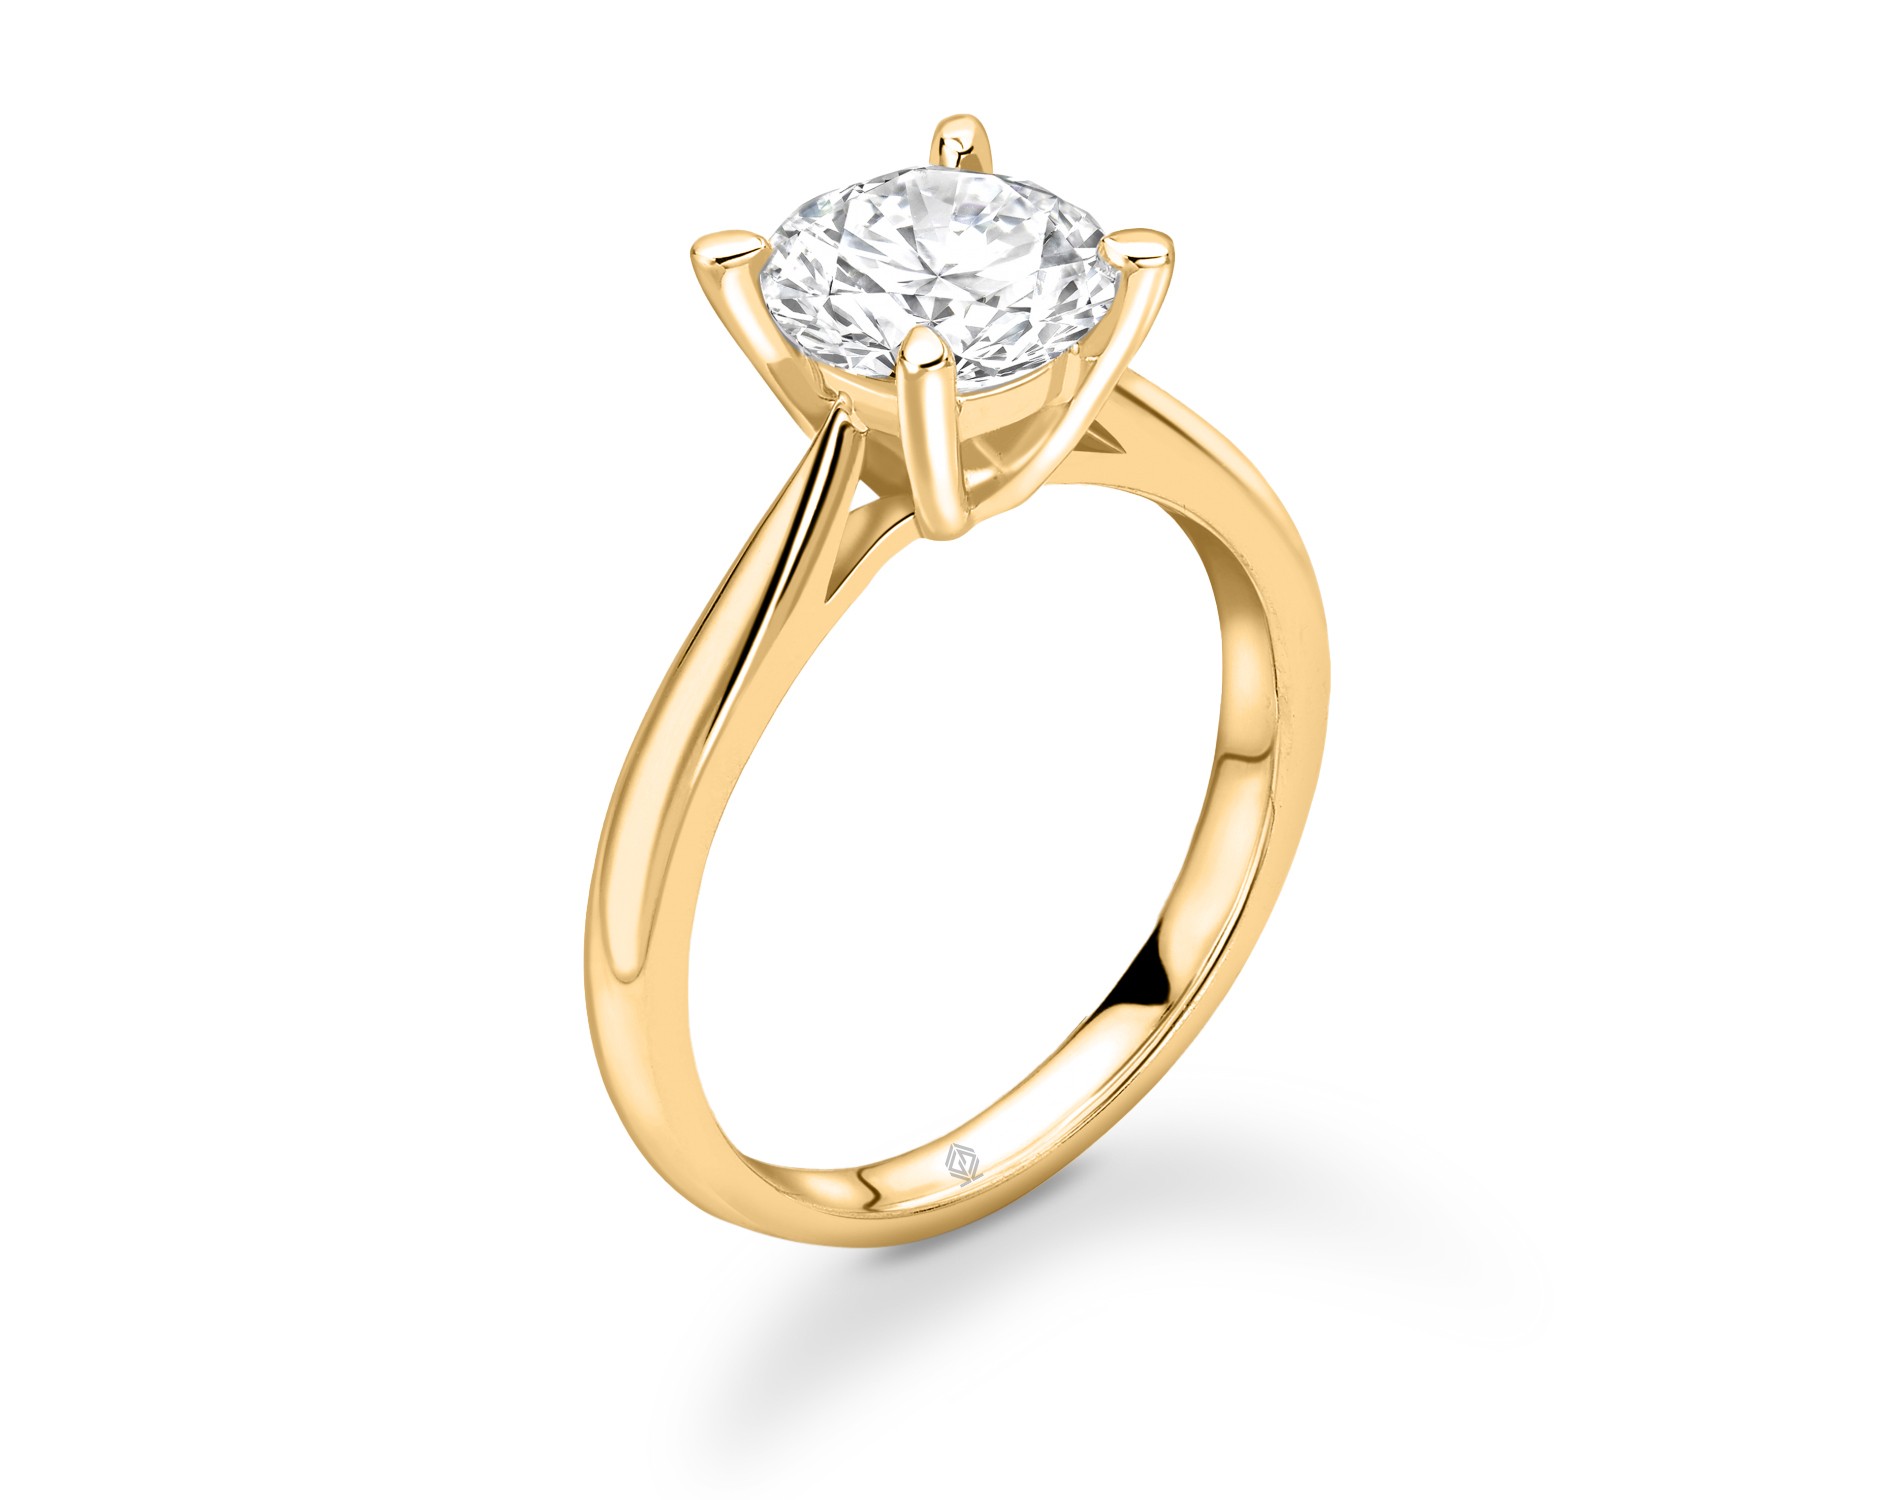 18K YELLOW GOLD 4 PRONGS SOLITAIRE ROUND CUT DIAMOND WITH YELLOW GOLD SHANK ENGAGEMENT RING